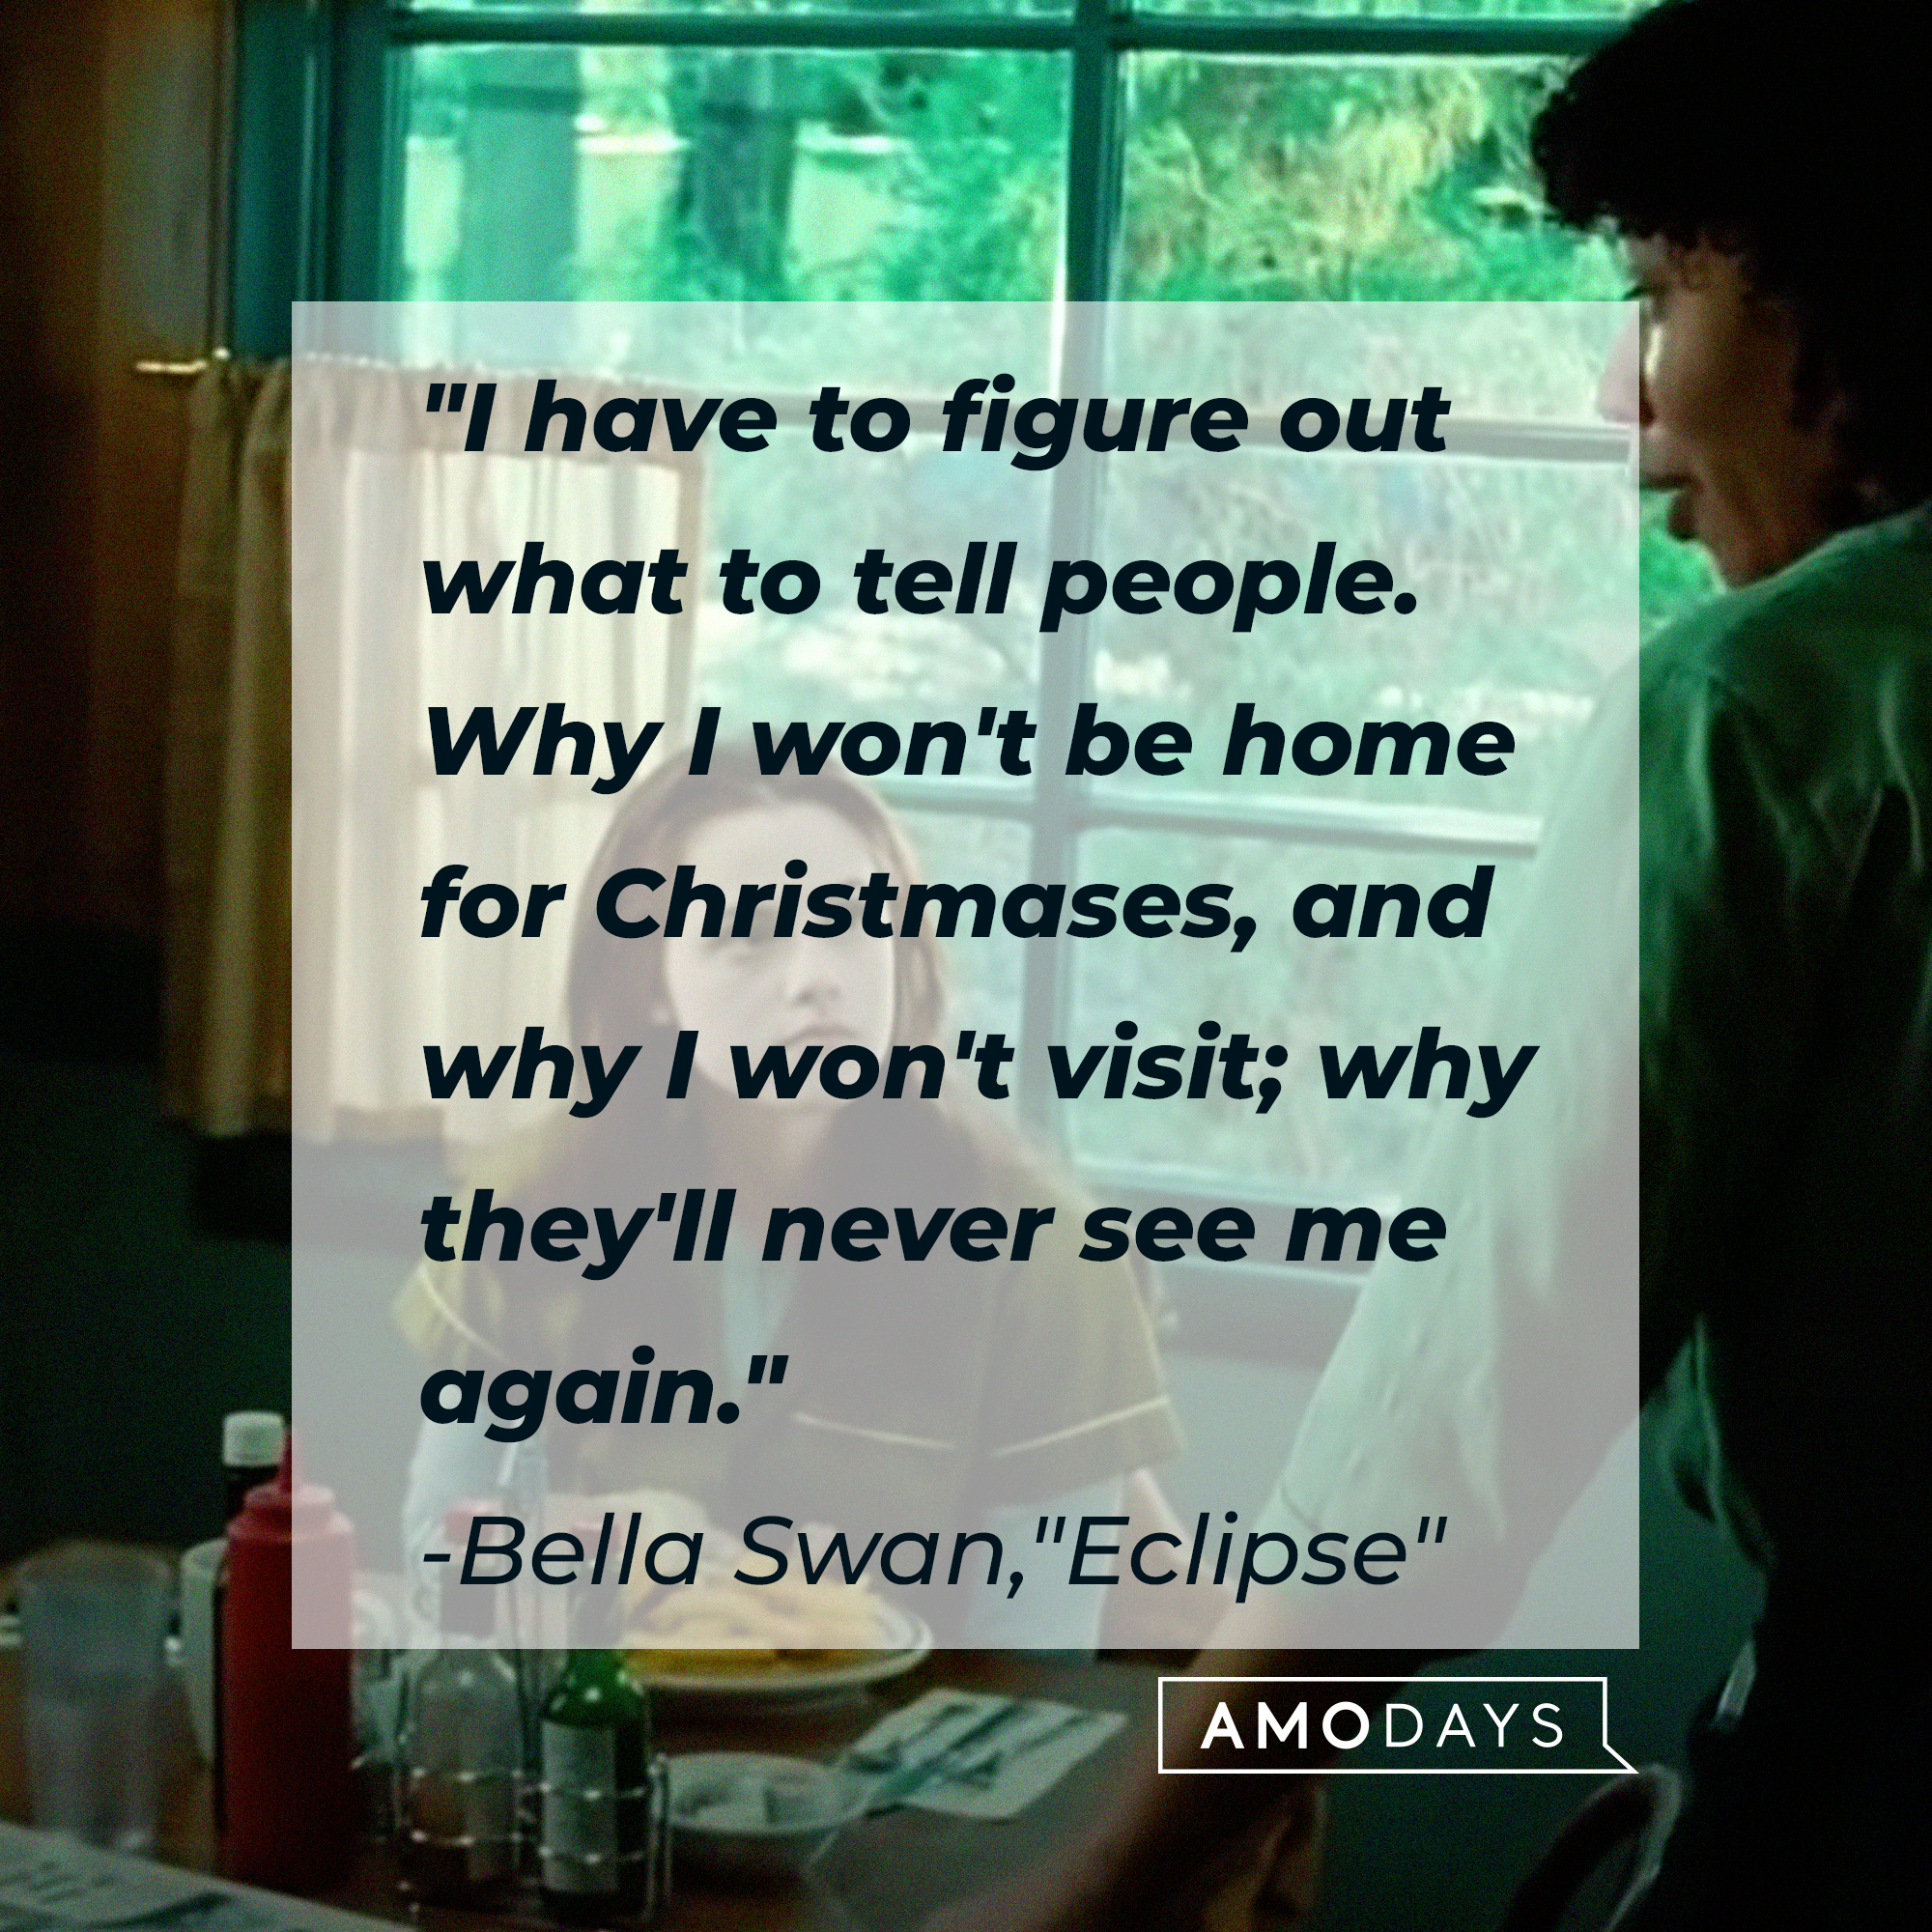 Bella Swan with her quote: "I have to figure out what to tell people. Why I won't be home for Christmases, and why I won't visit; why they'll never see me again." | Source: Facebook.com/twilight